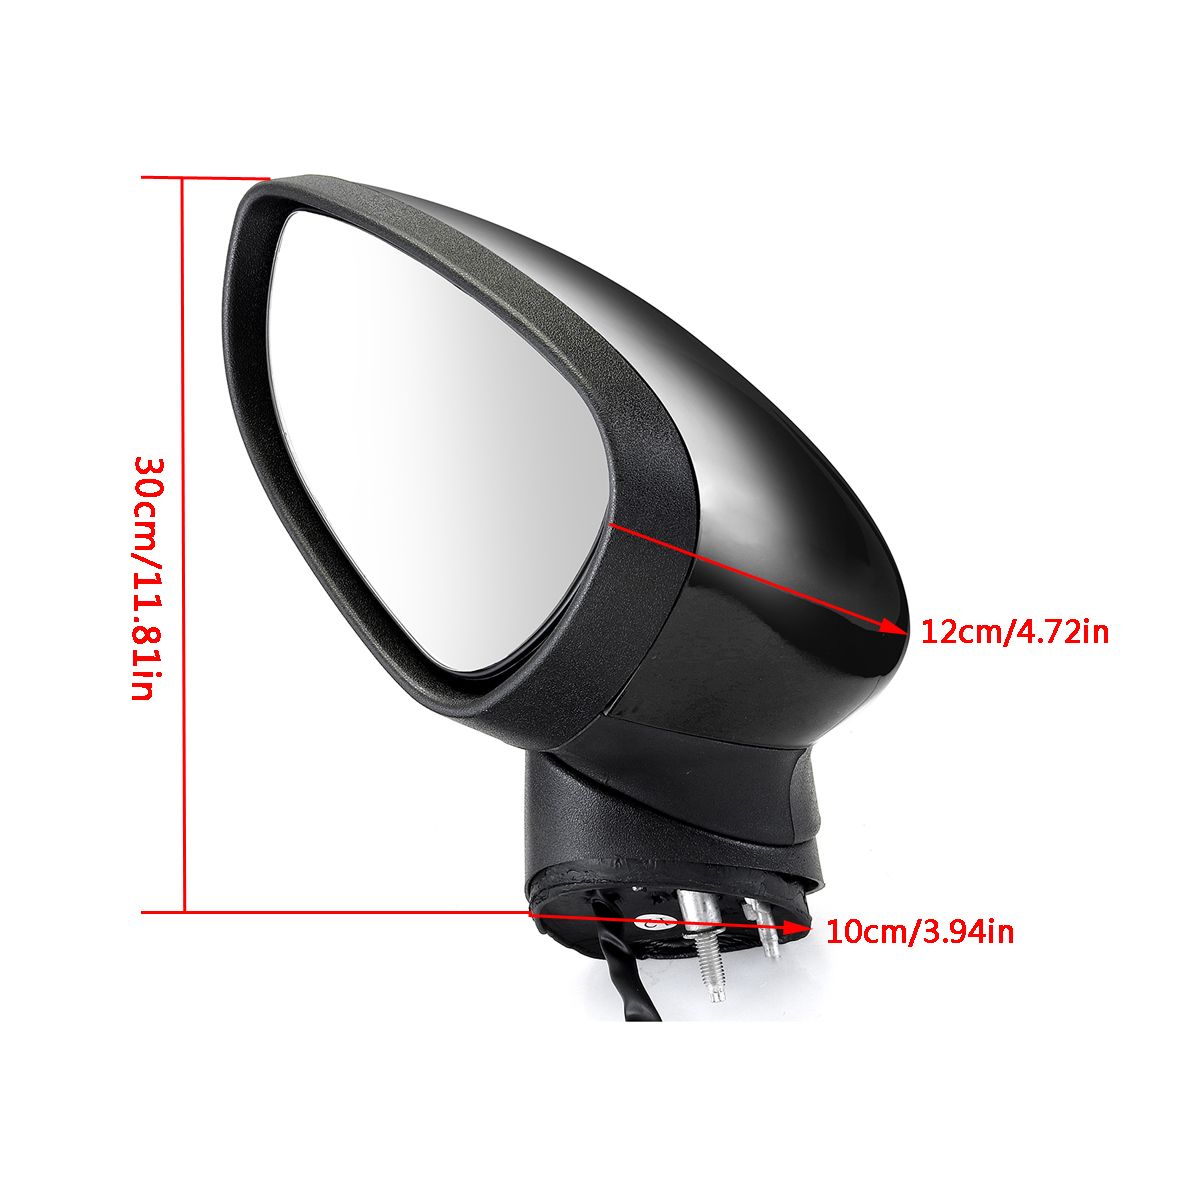 Left-Side-Door-Wing-Electric-Mirror-With-LED-Turn-Light-For-Ford-Fiesta-MK7-2008-2012-1711738